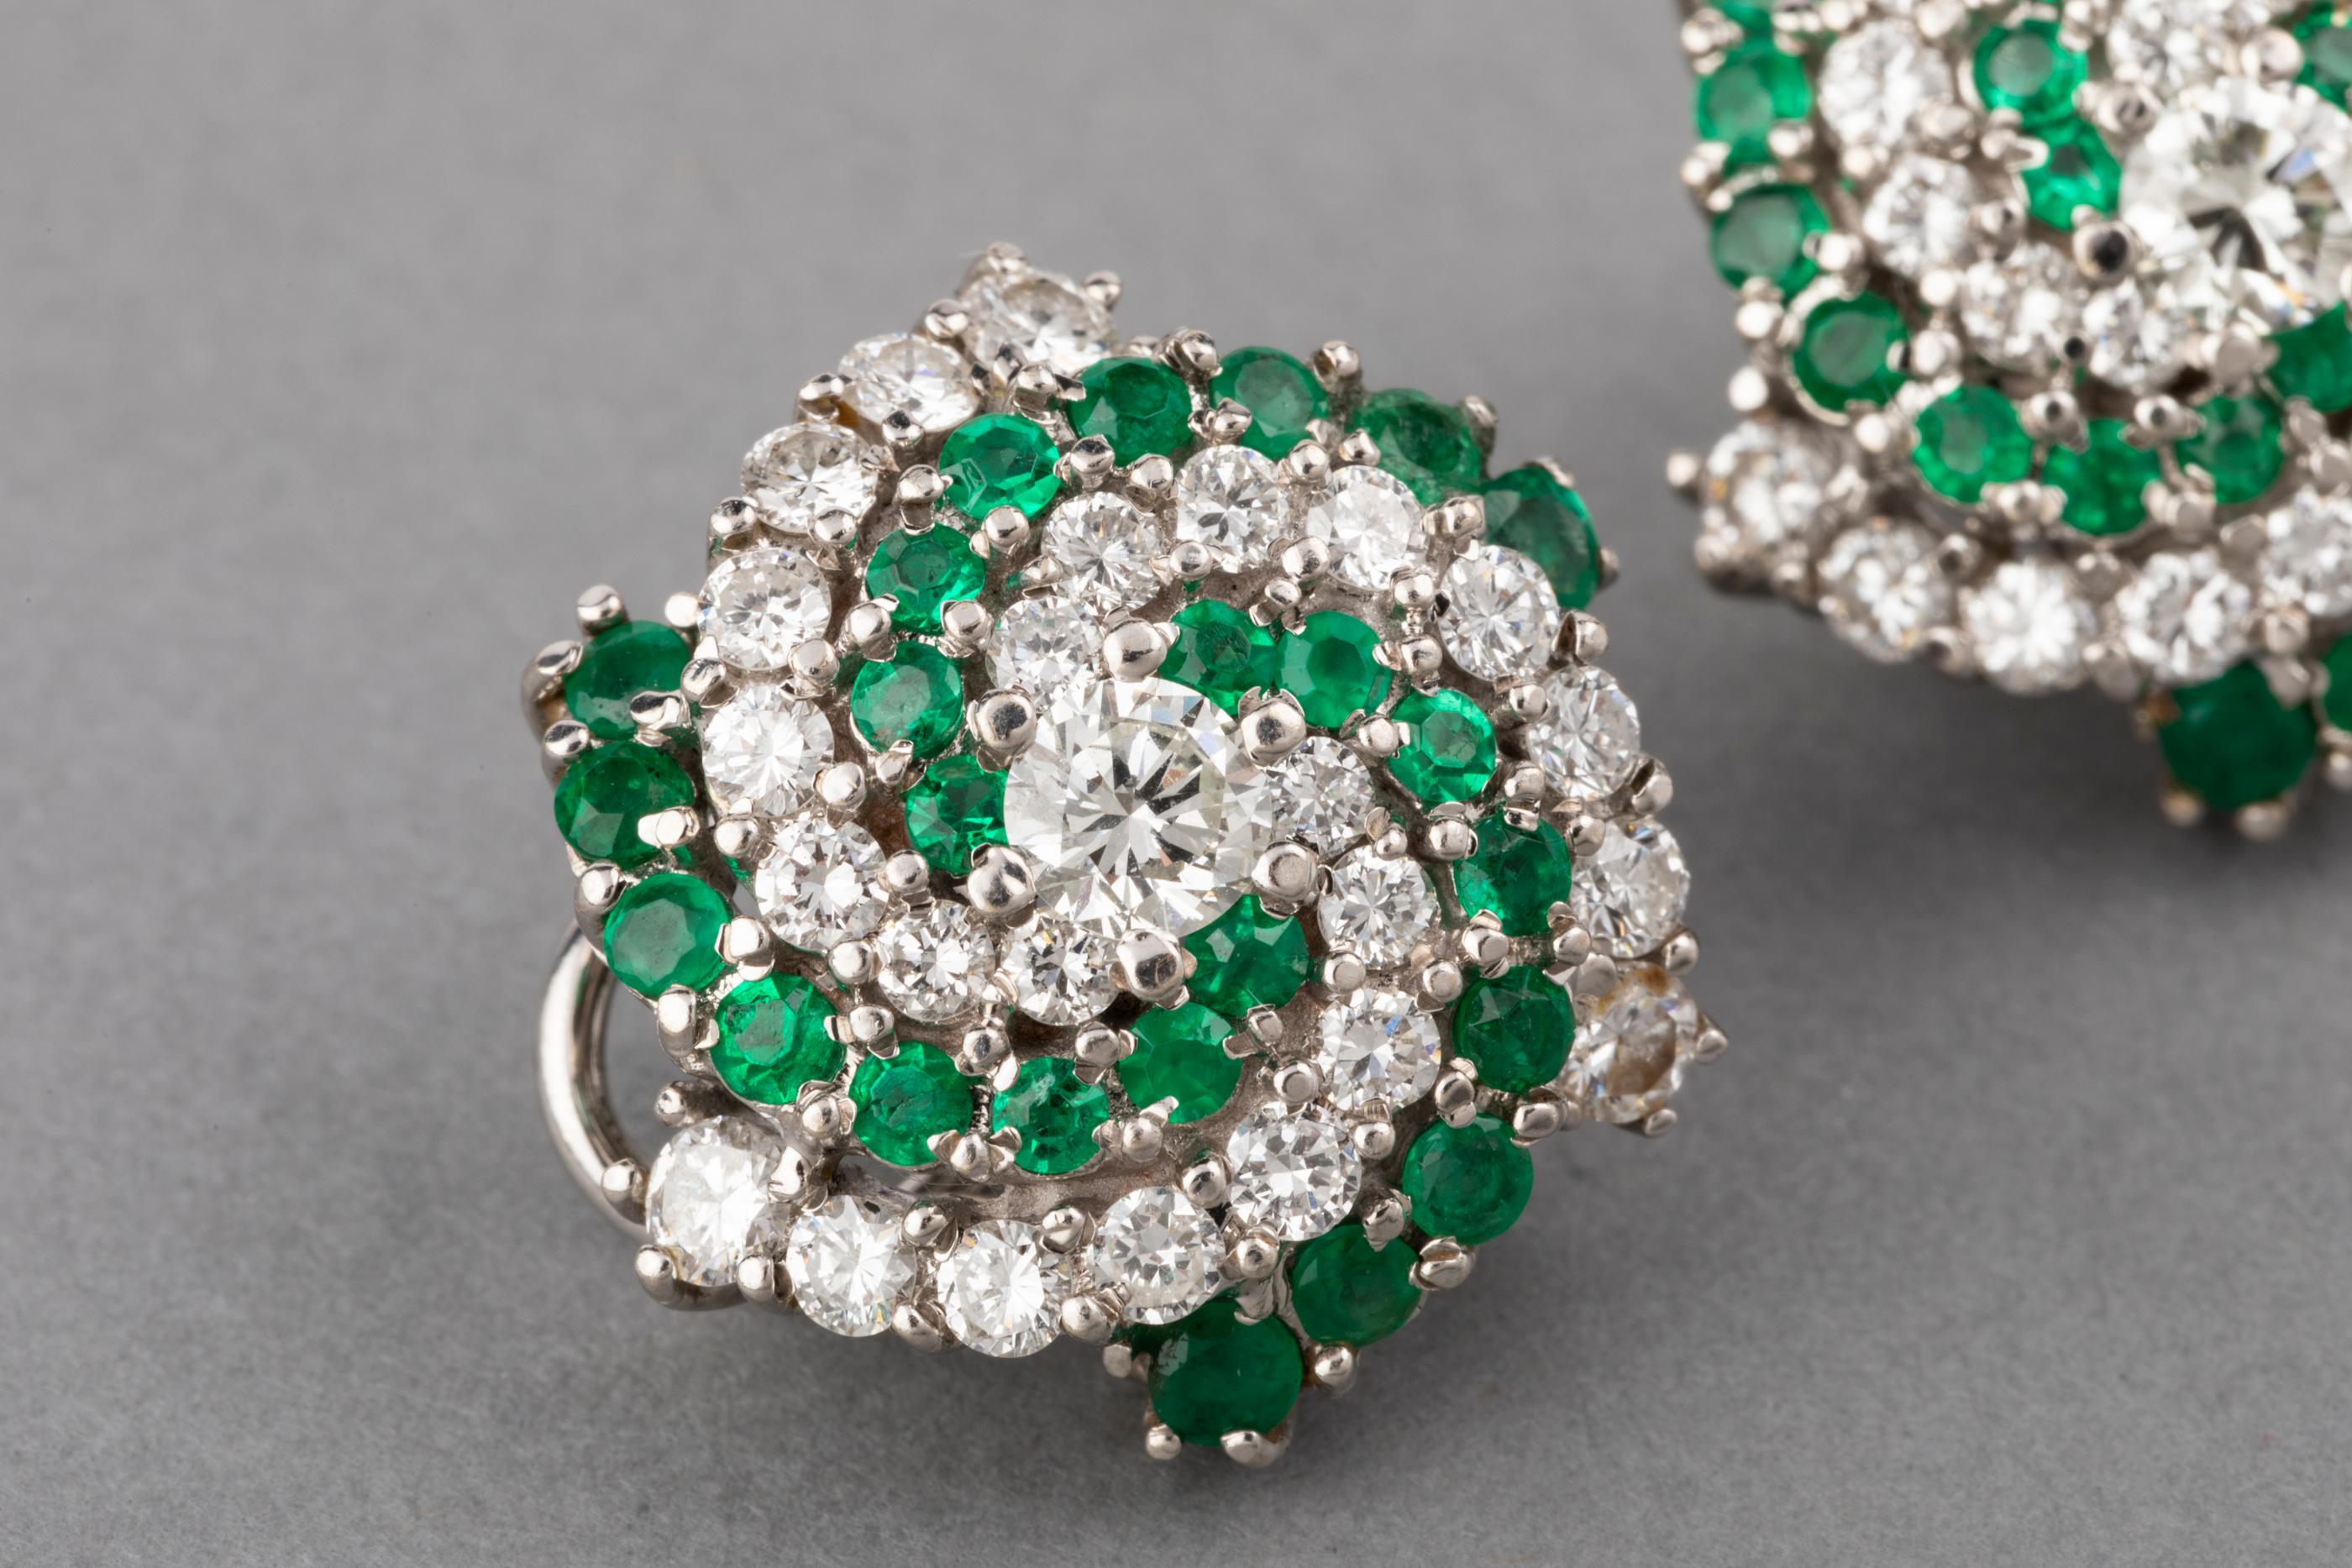 5 Carat Diamonds and 4 Carat Emeralds Ring and Earrings Set 5